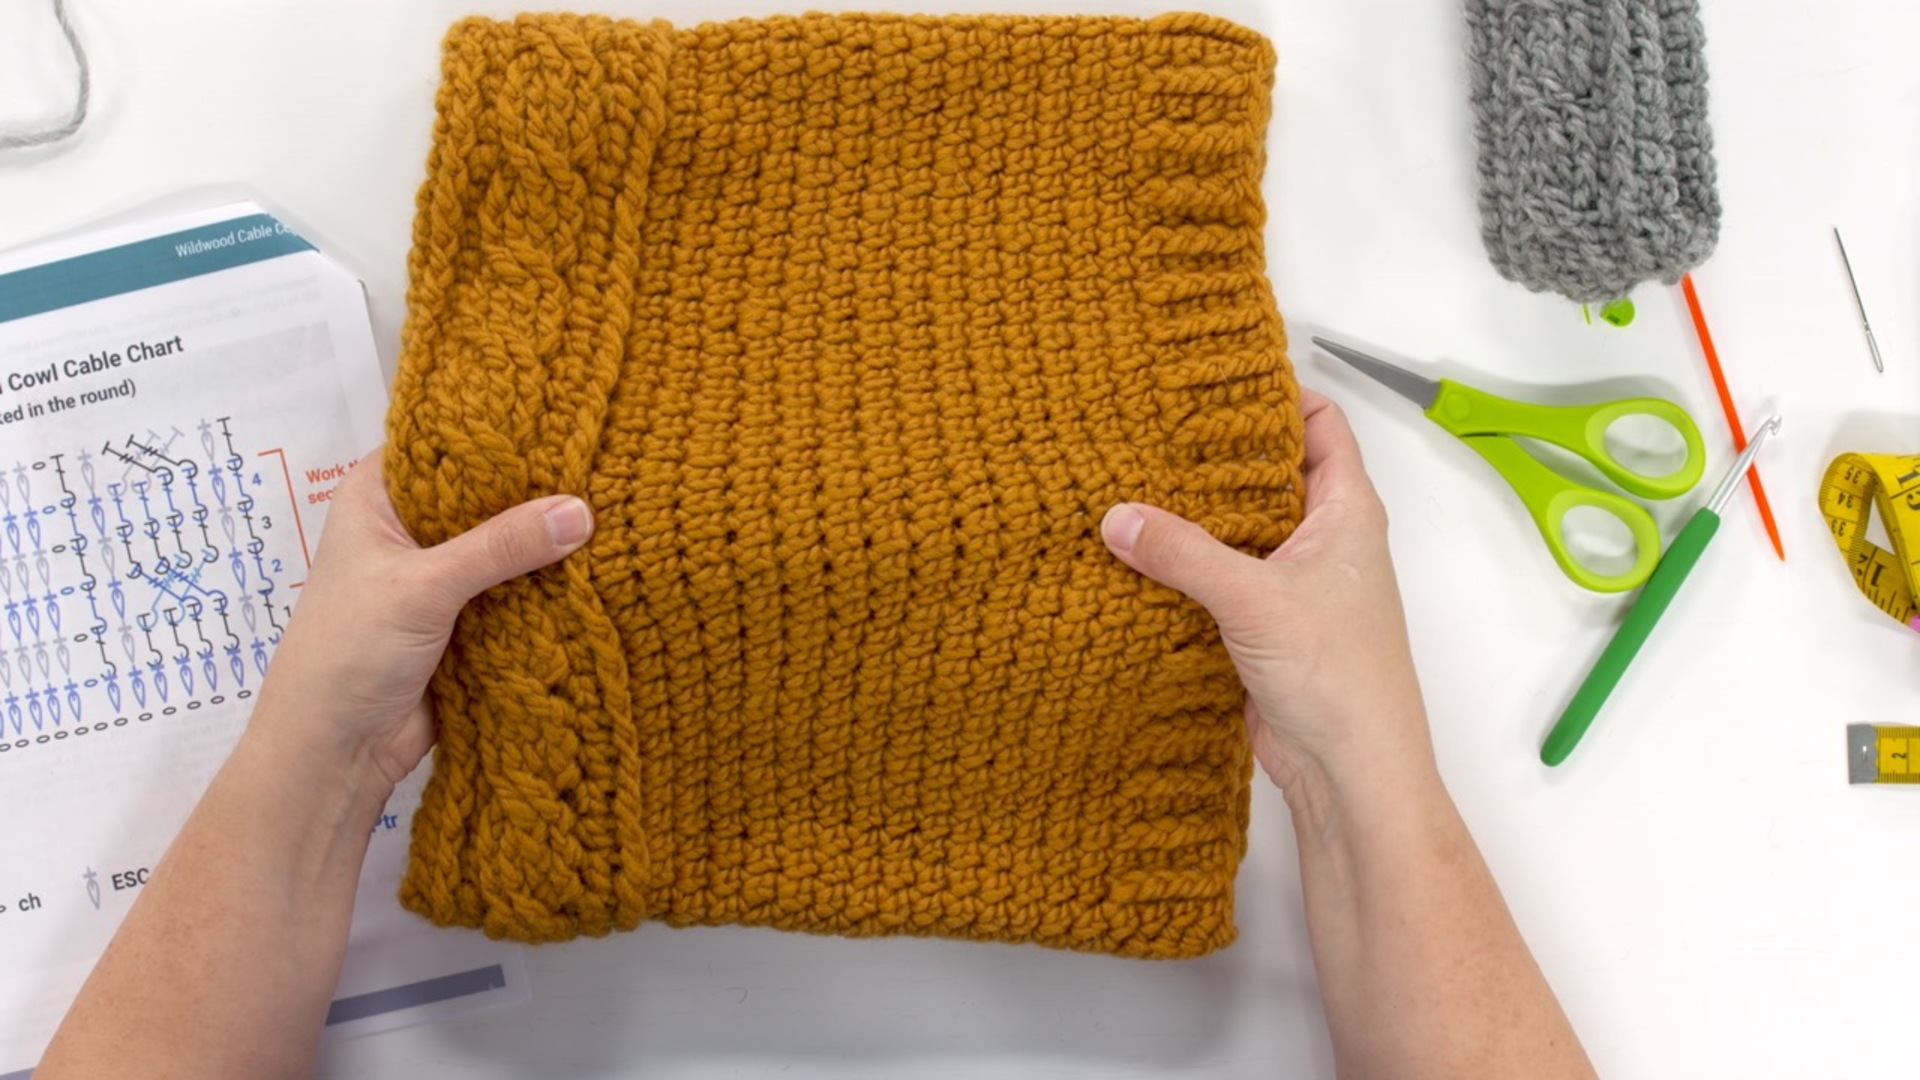 Beginning the Cabled Cowl: The Cable